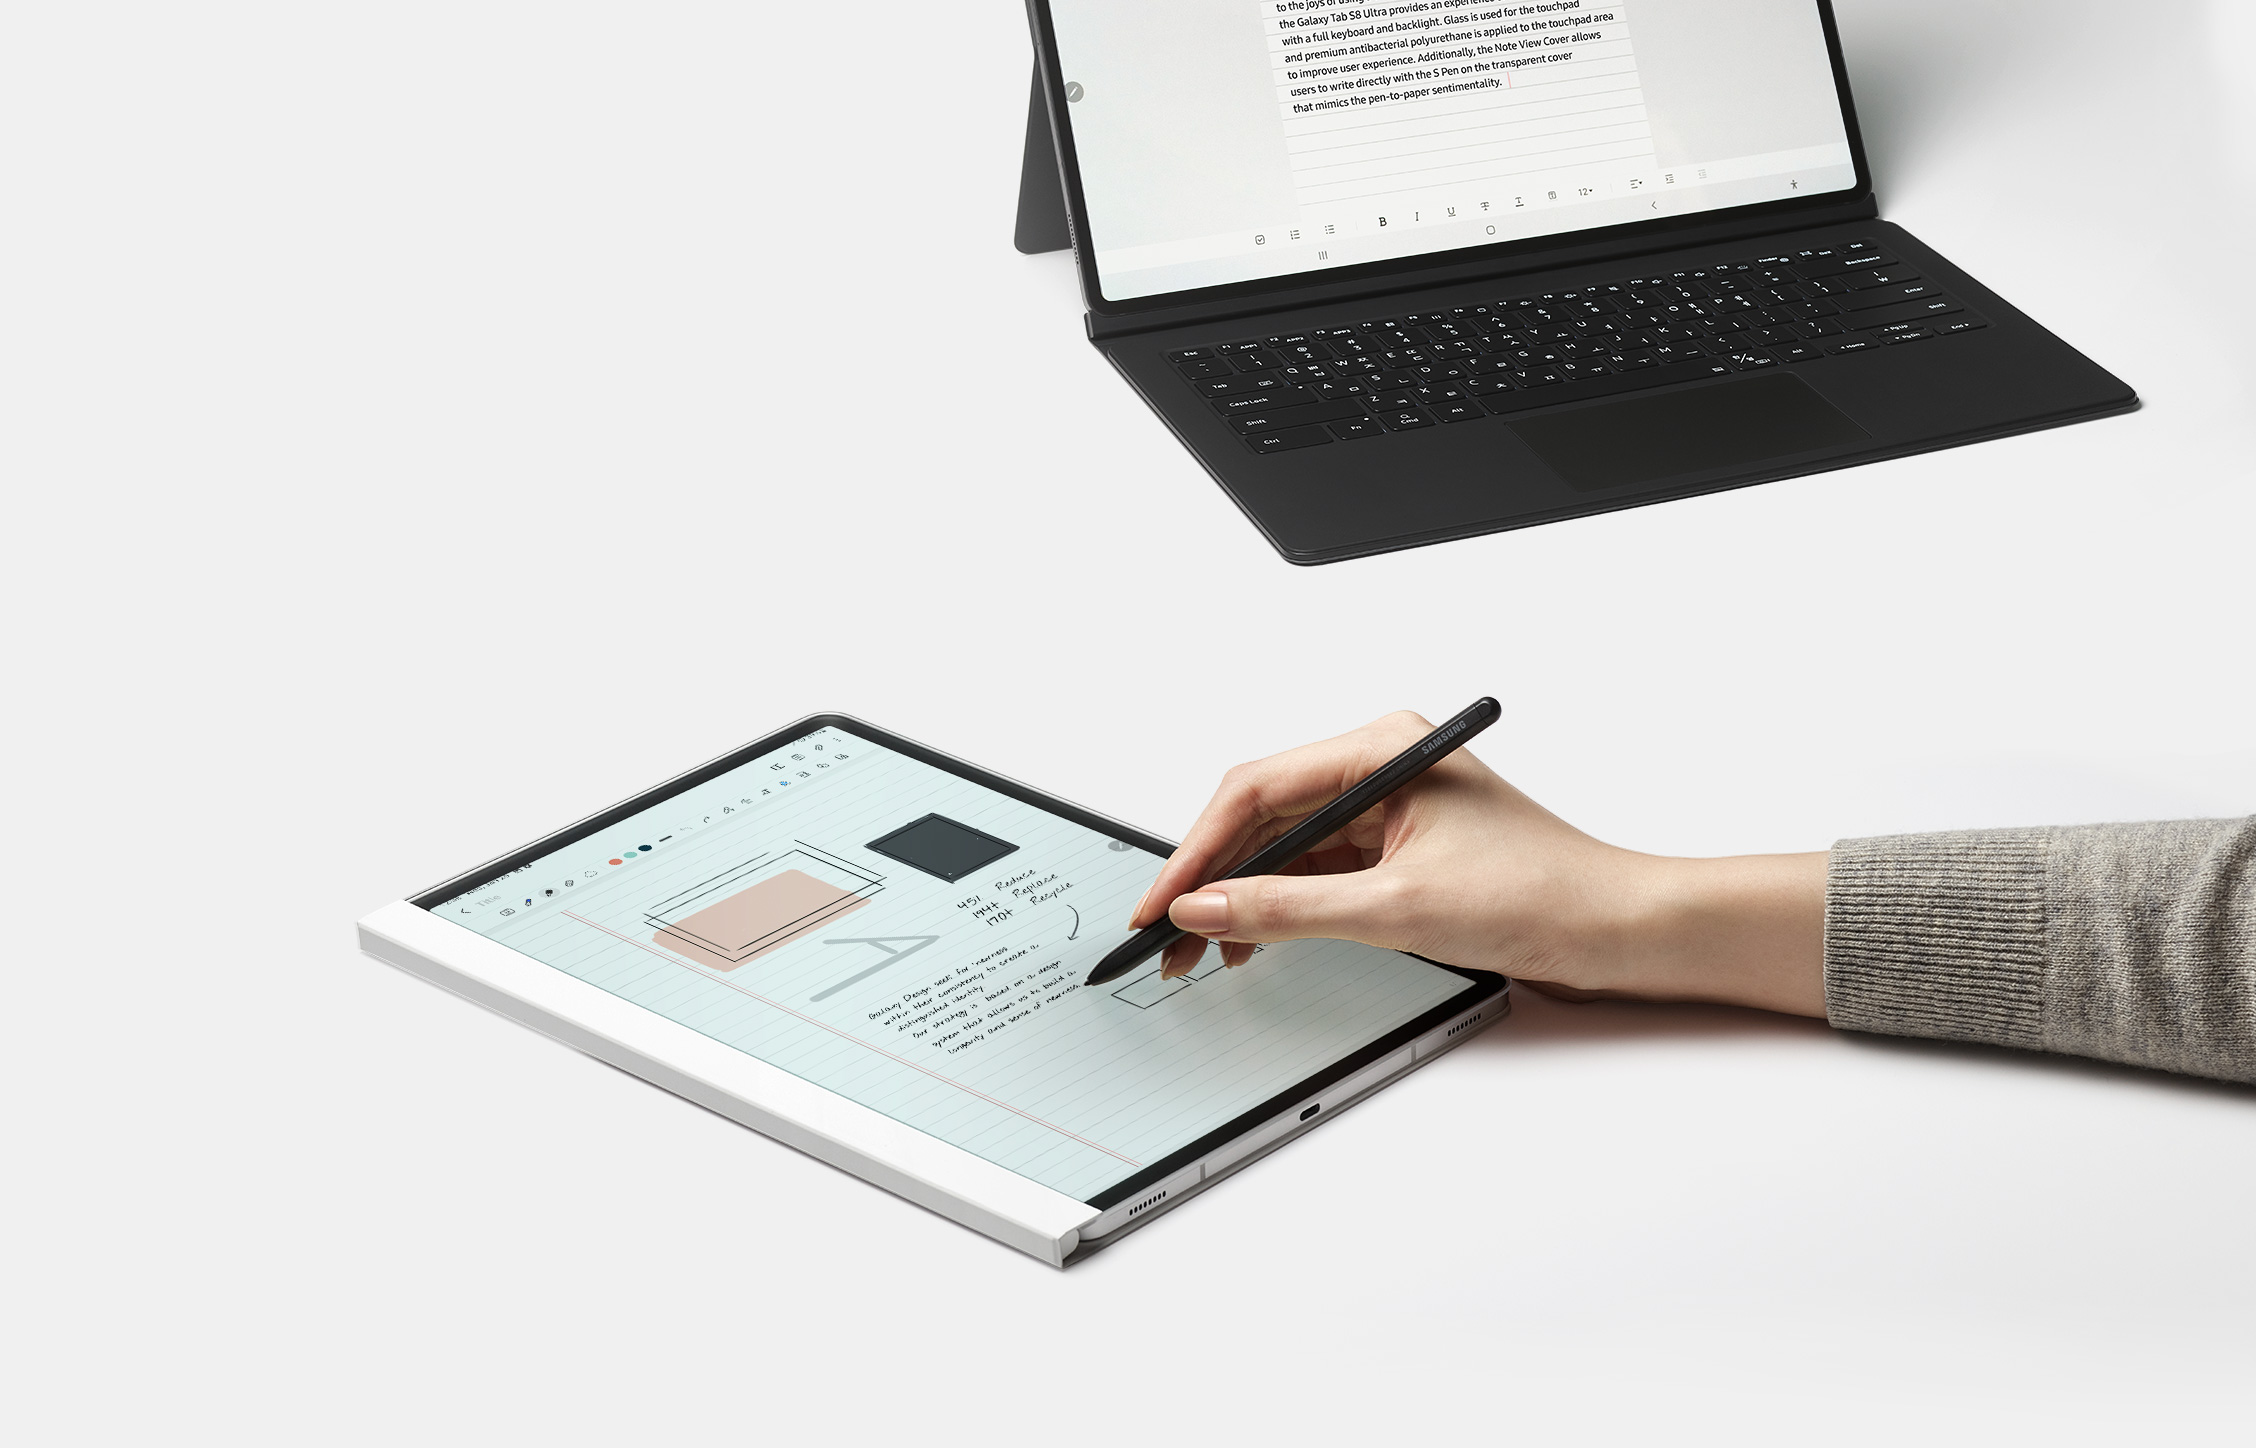 It is the book cover keyboard and note view cover image of the Galaxy Tab S8.